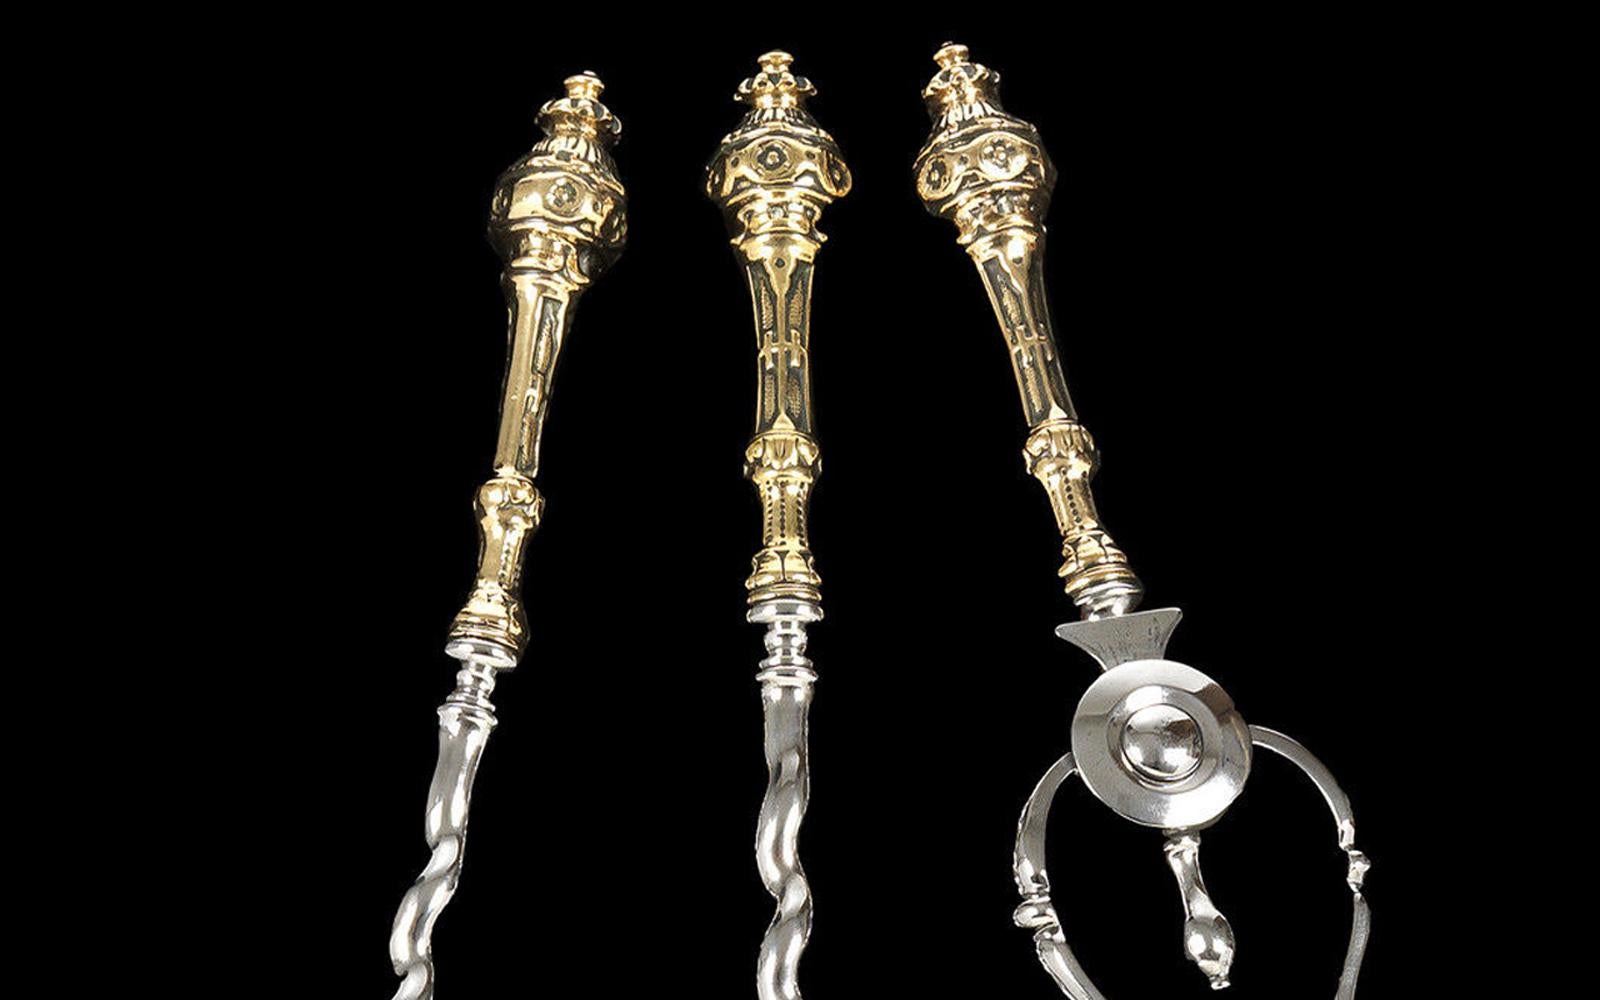 With brass knob finial decorated handles with twisted stems.

 